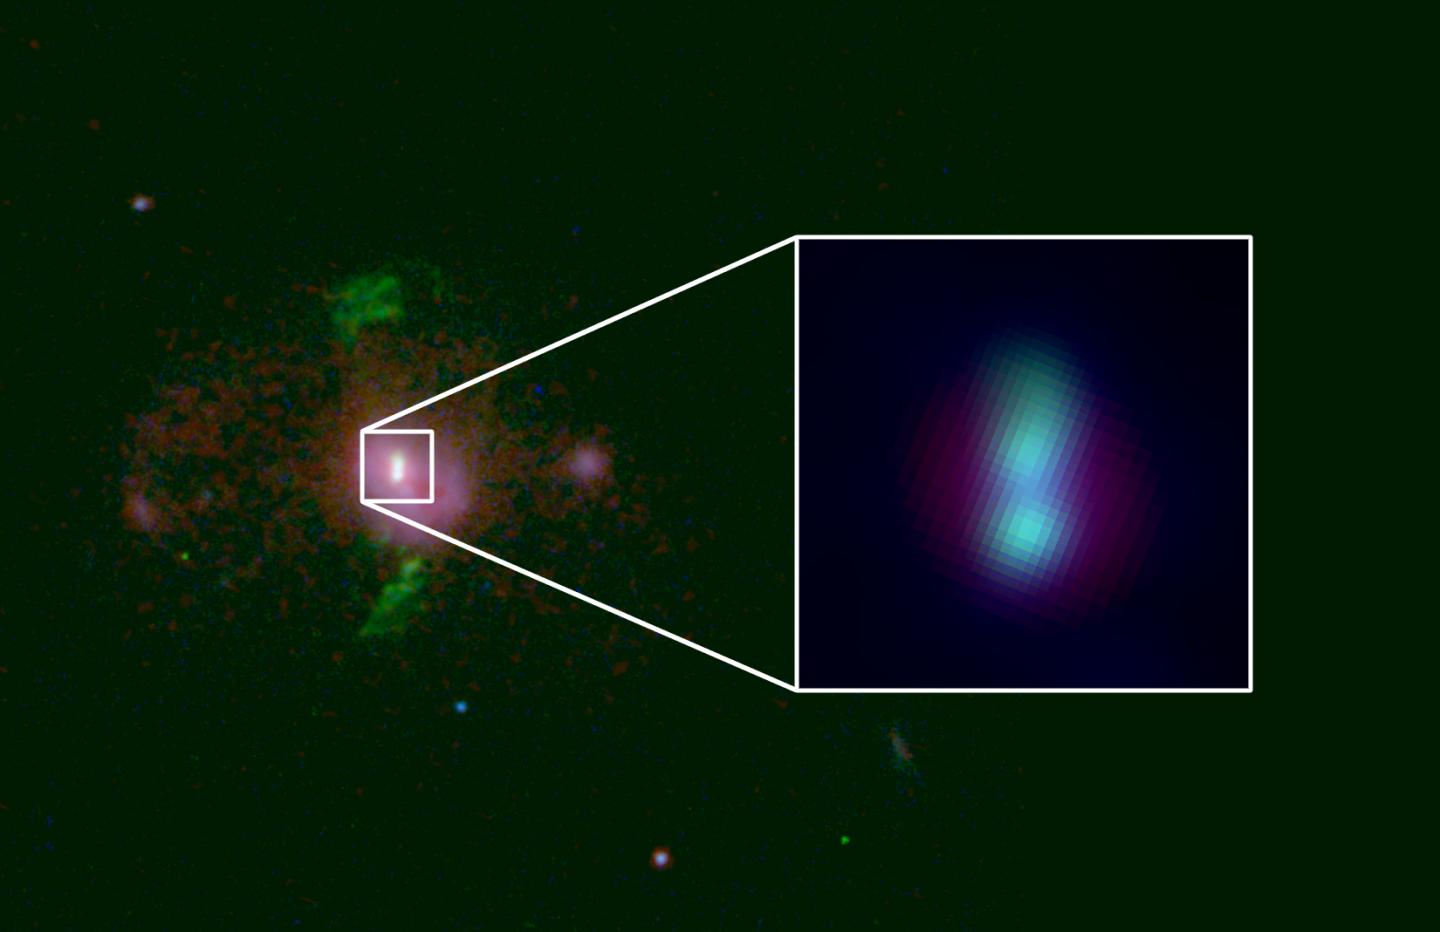 Pair of supermassive black holes discovered on a collision course